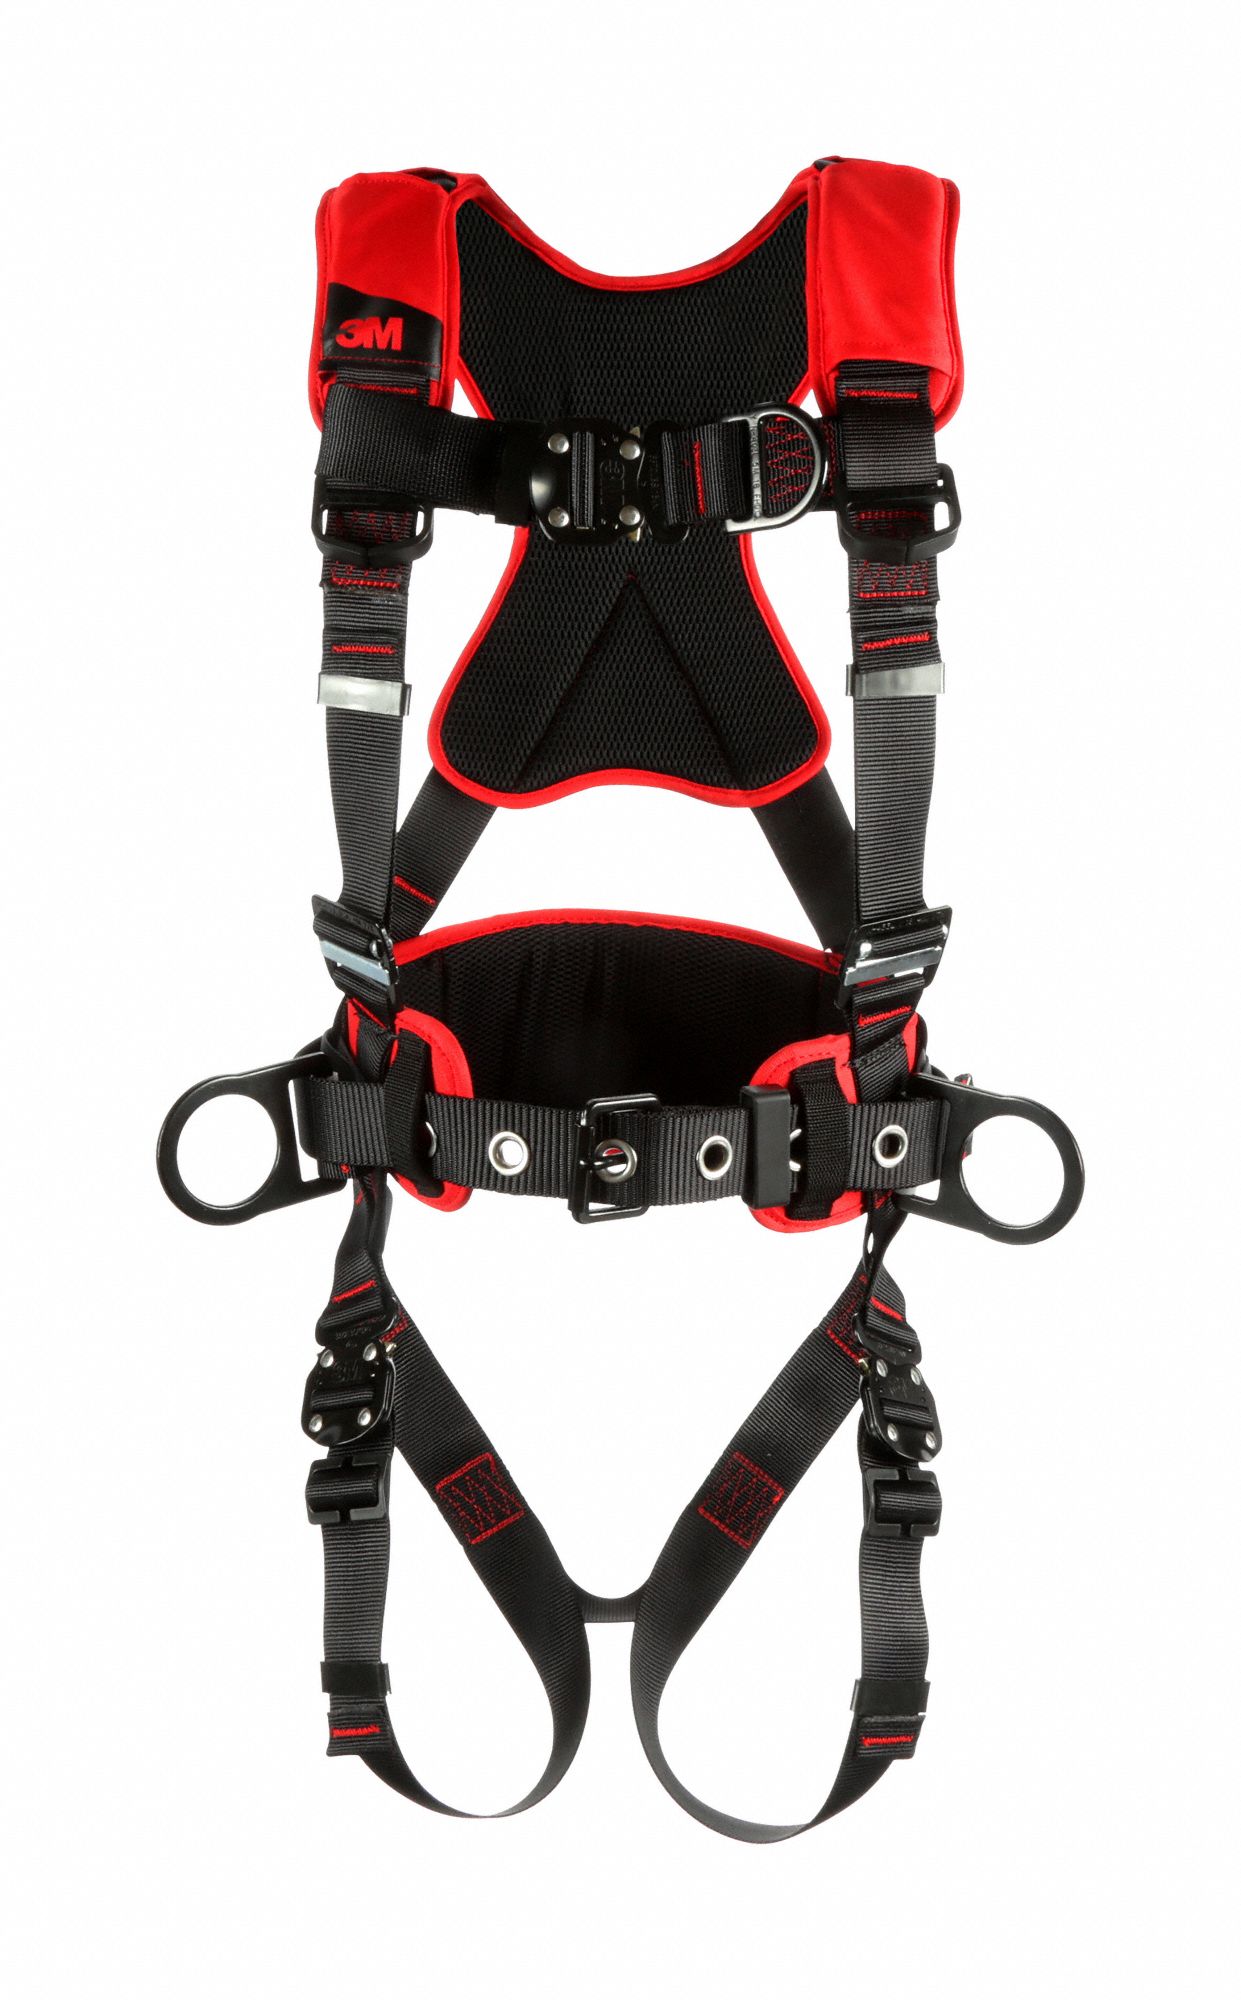 3m Protecta 1161222 3m Protecta Full Body Harness: Climbing/Positioning ...